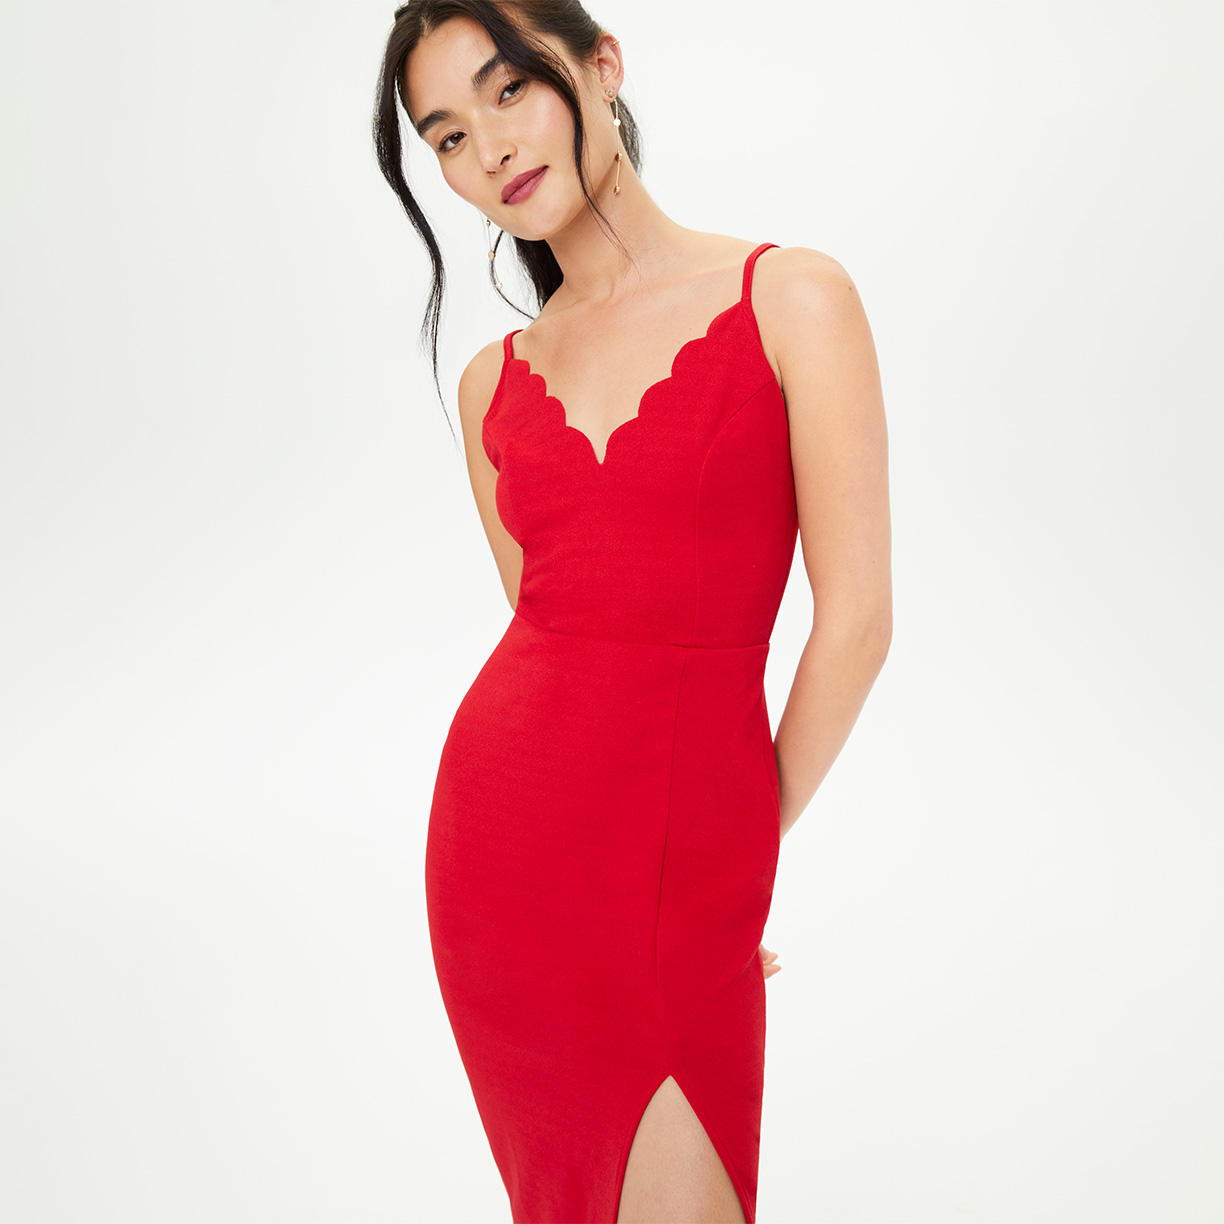 Women's Special Occasion Dressing Up to 60% Off